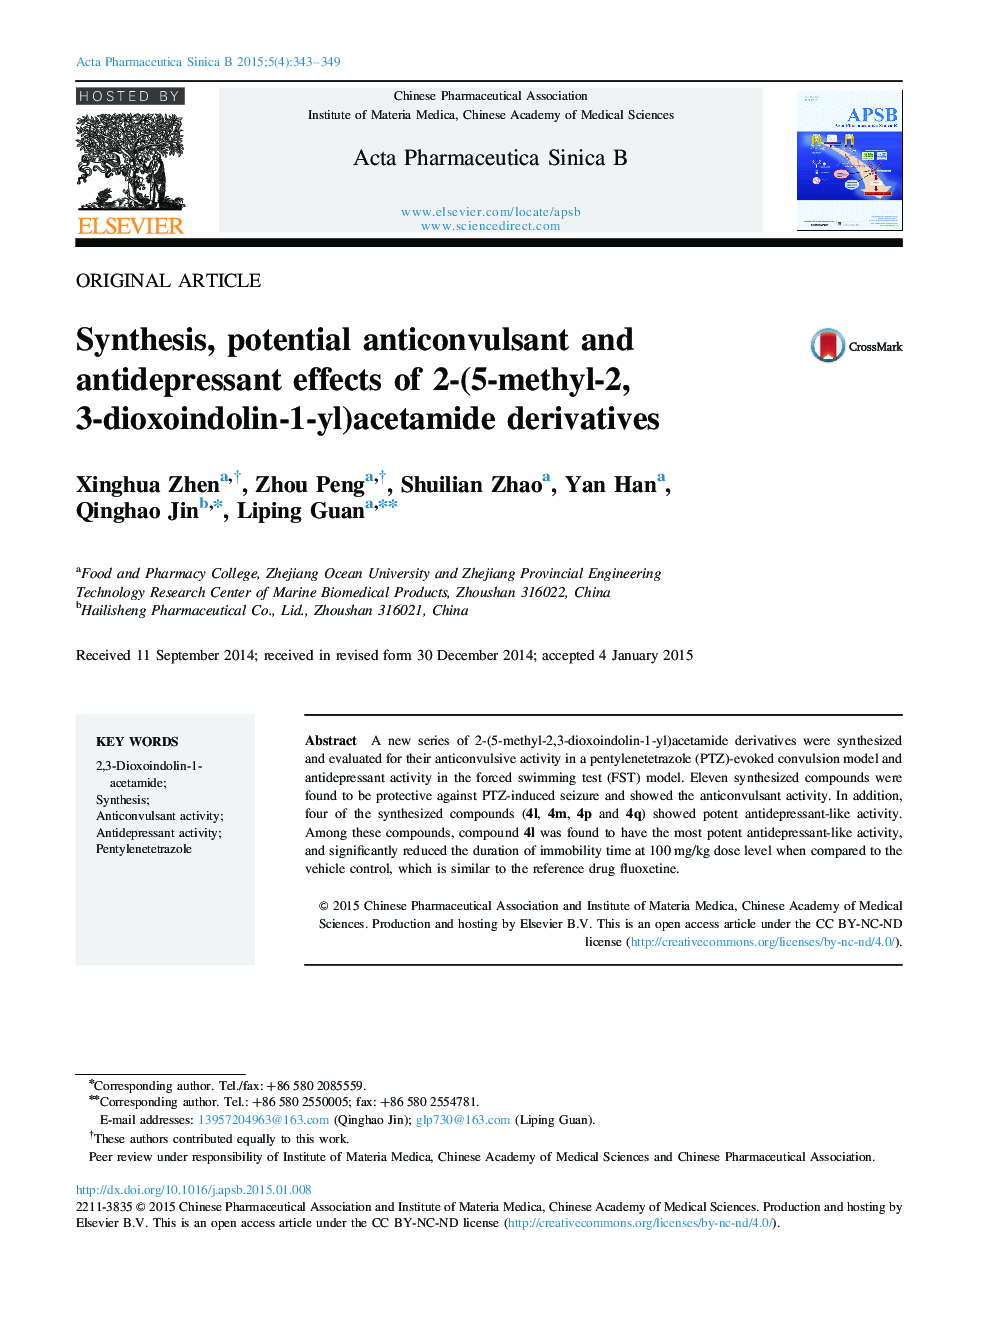 Synthesis, potential anticonvulsant and antidepressant effects of 2-(5-methyl-2,3-dioxoindolin-1-yl)acetamide derivatives 